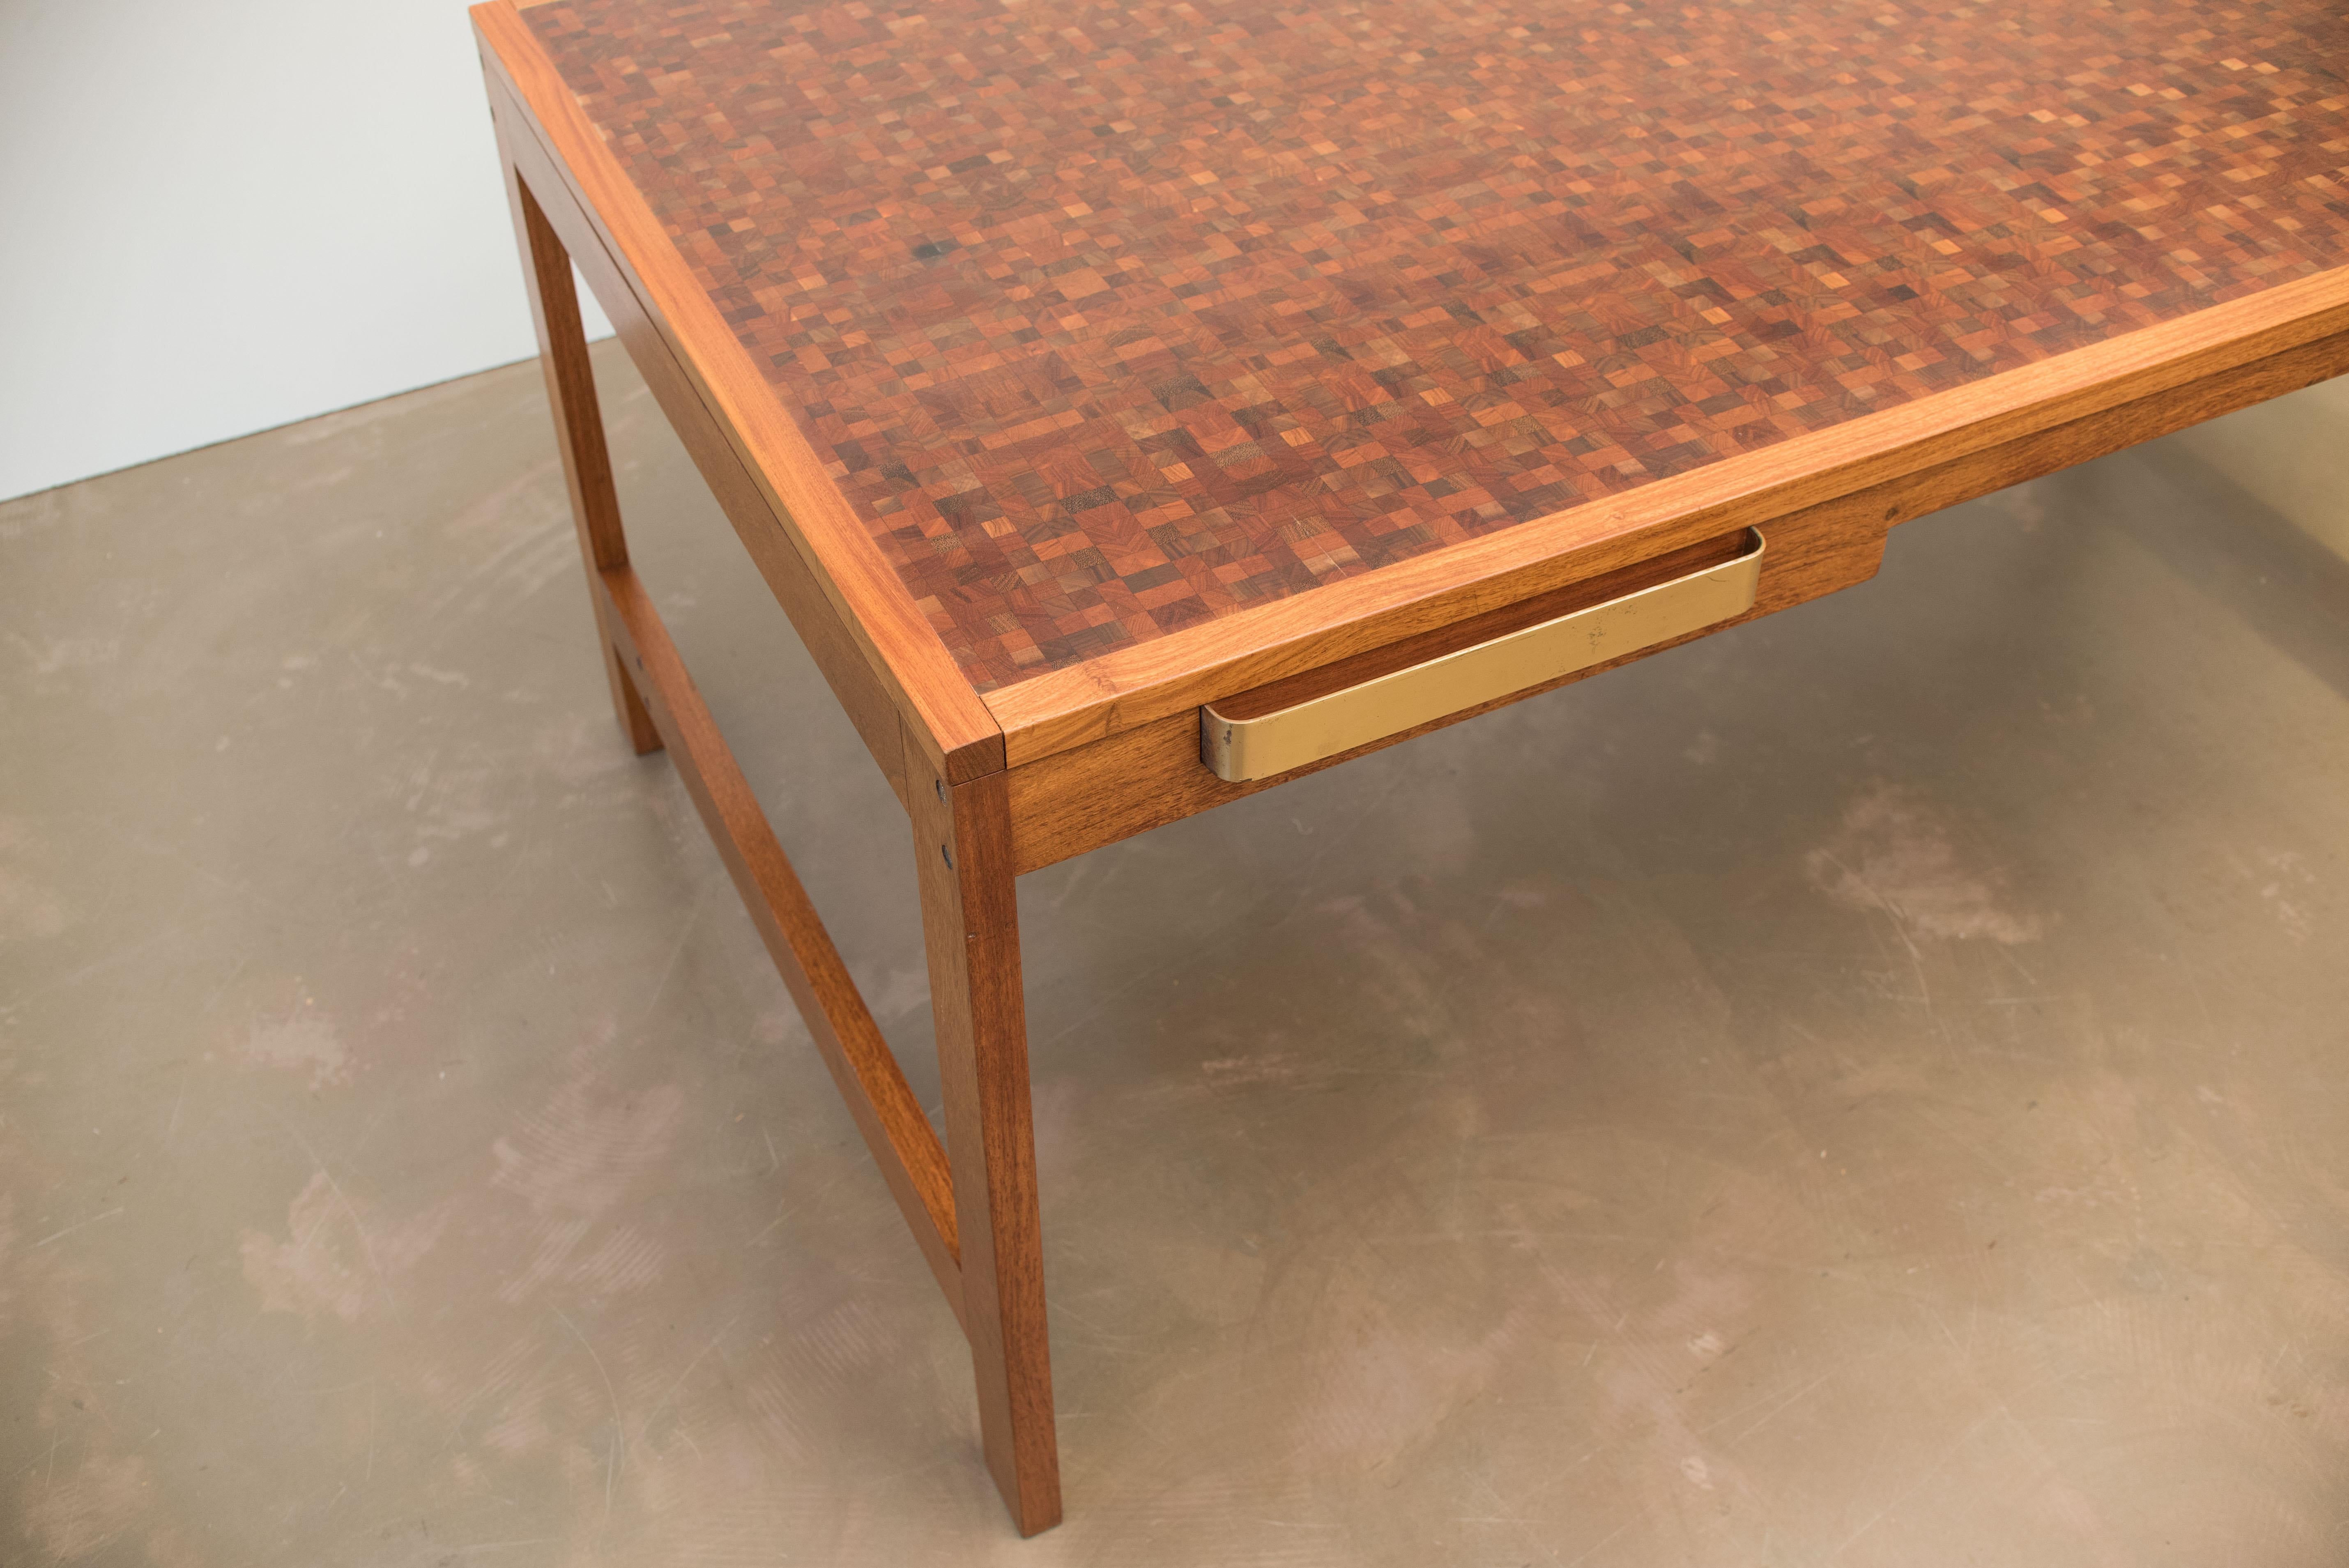 This Danish desk table features a tabletop with inlaid colored wood.